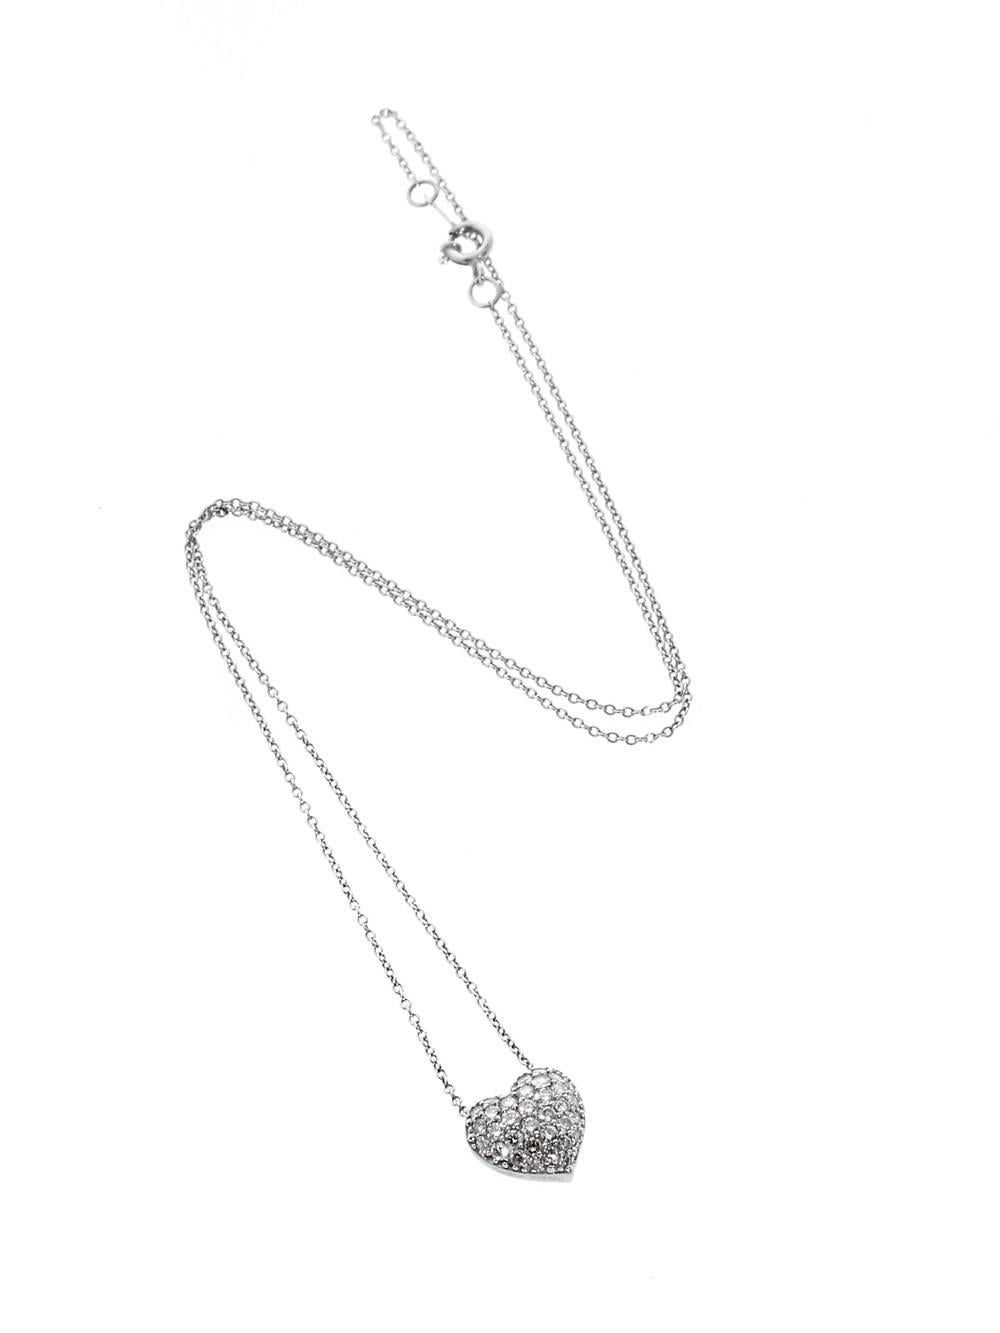 A magnificent Cartier diamond heart draped with magnificent round brilliant cut diamonds set in platinum. The necklace measures 16″ in length,

Dimensions: The pendant has a diameter of 11mm (.43″ Inches)

Inventory ID: 0000102